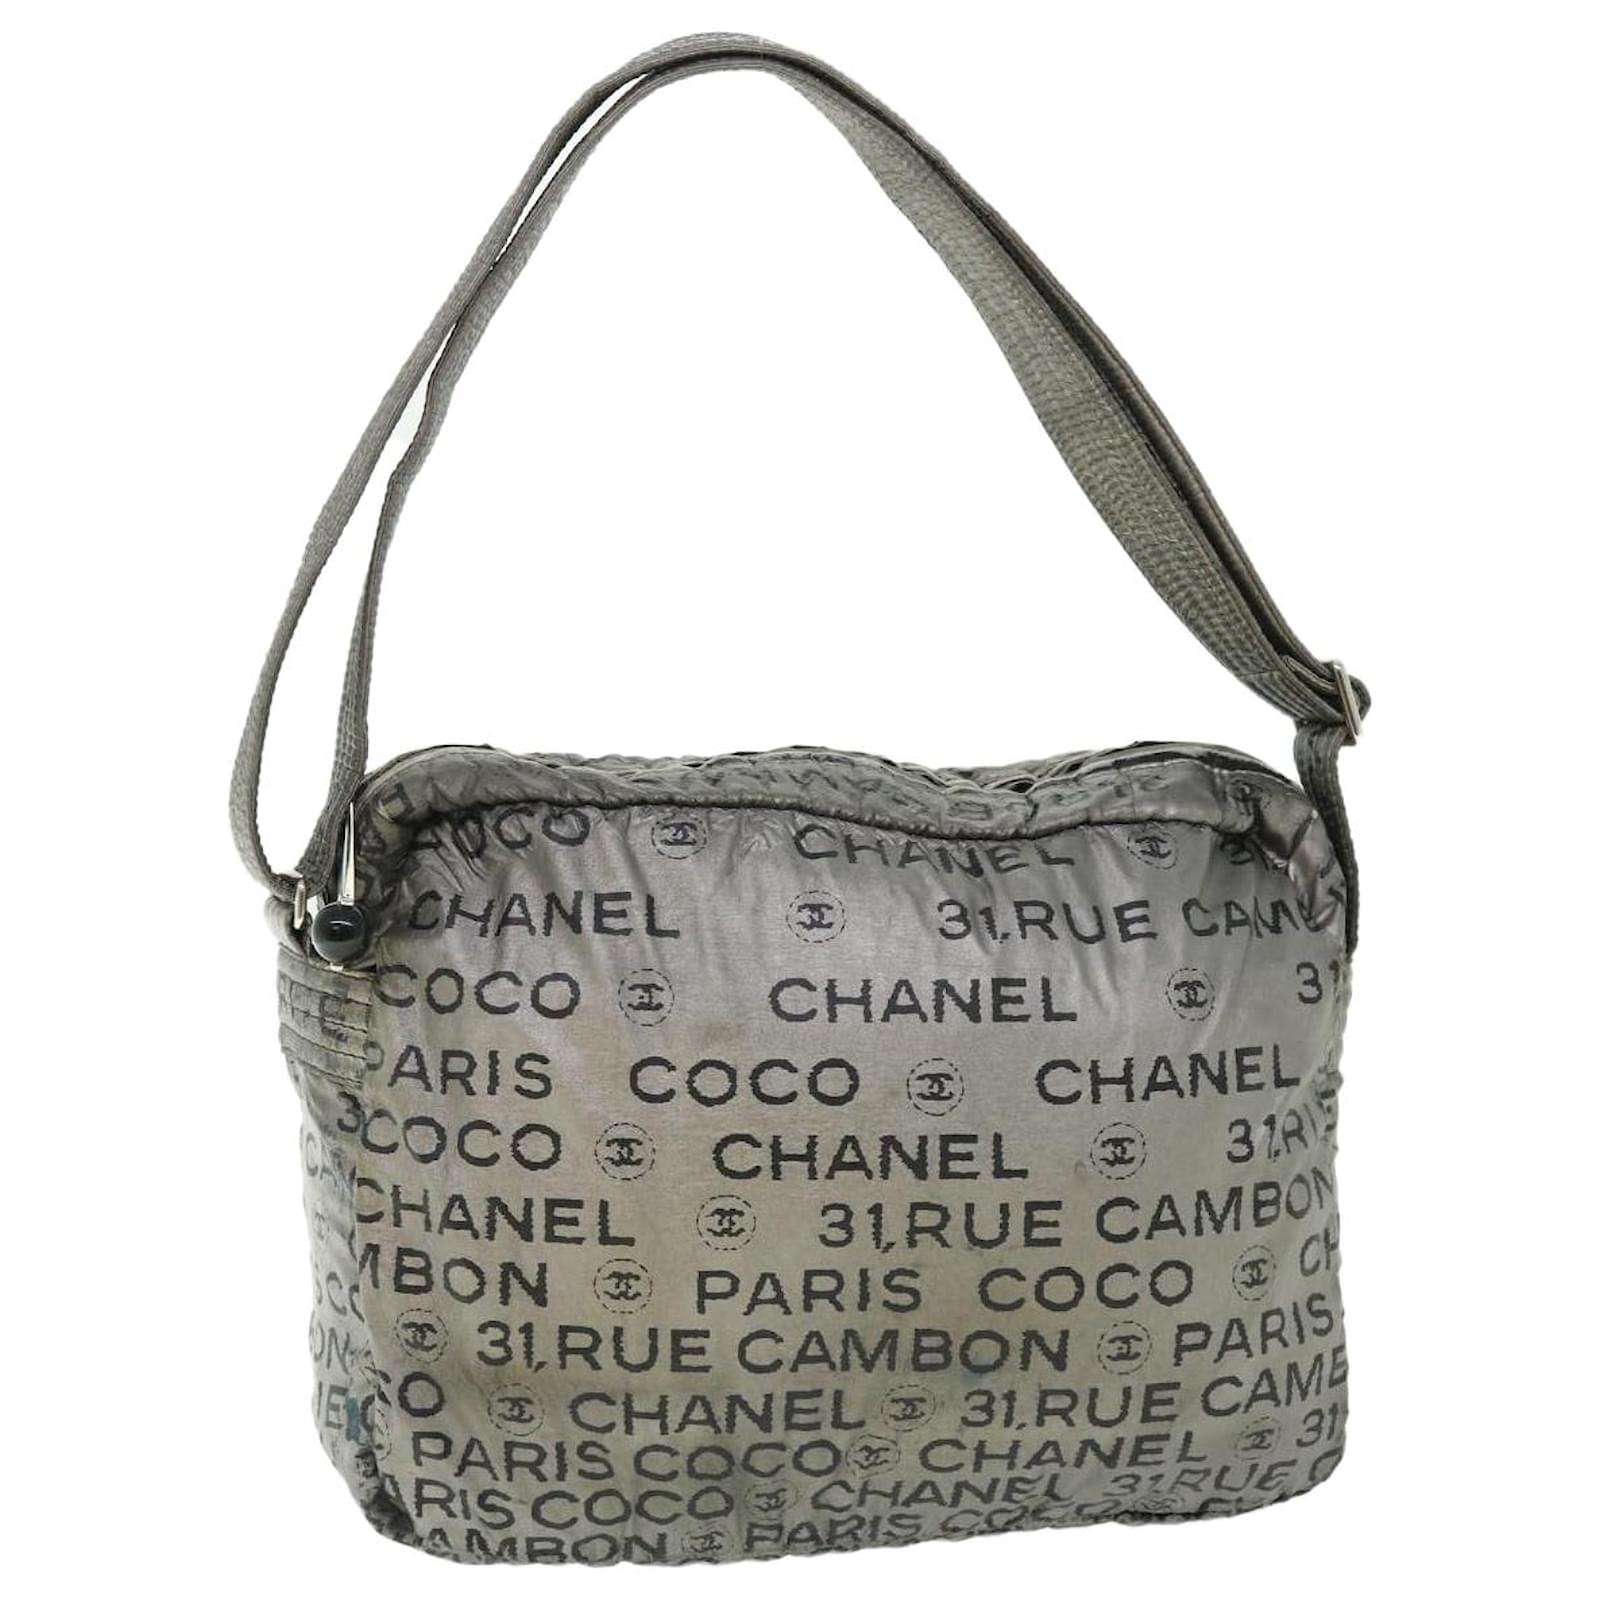 CHANEL Unlimited Shoulder Bag Patent leather Silver CC Auth bs7424